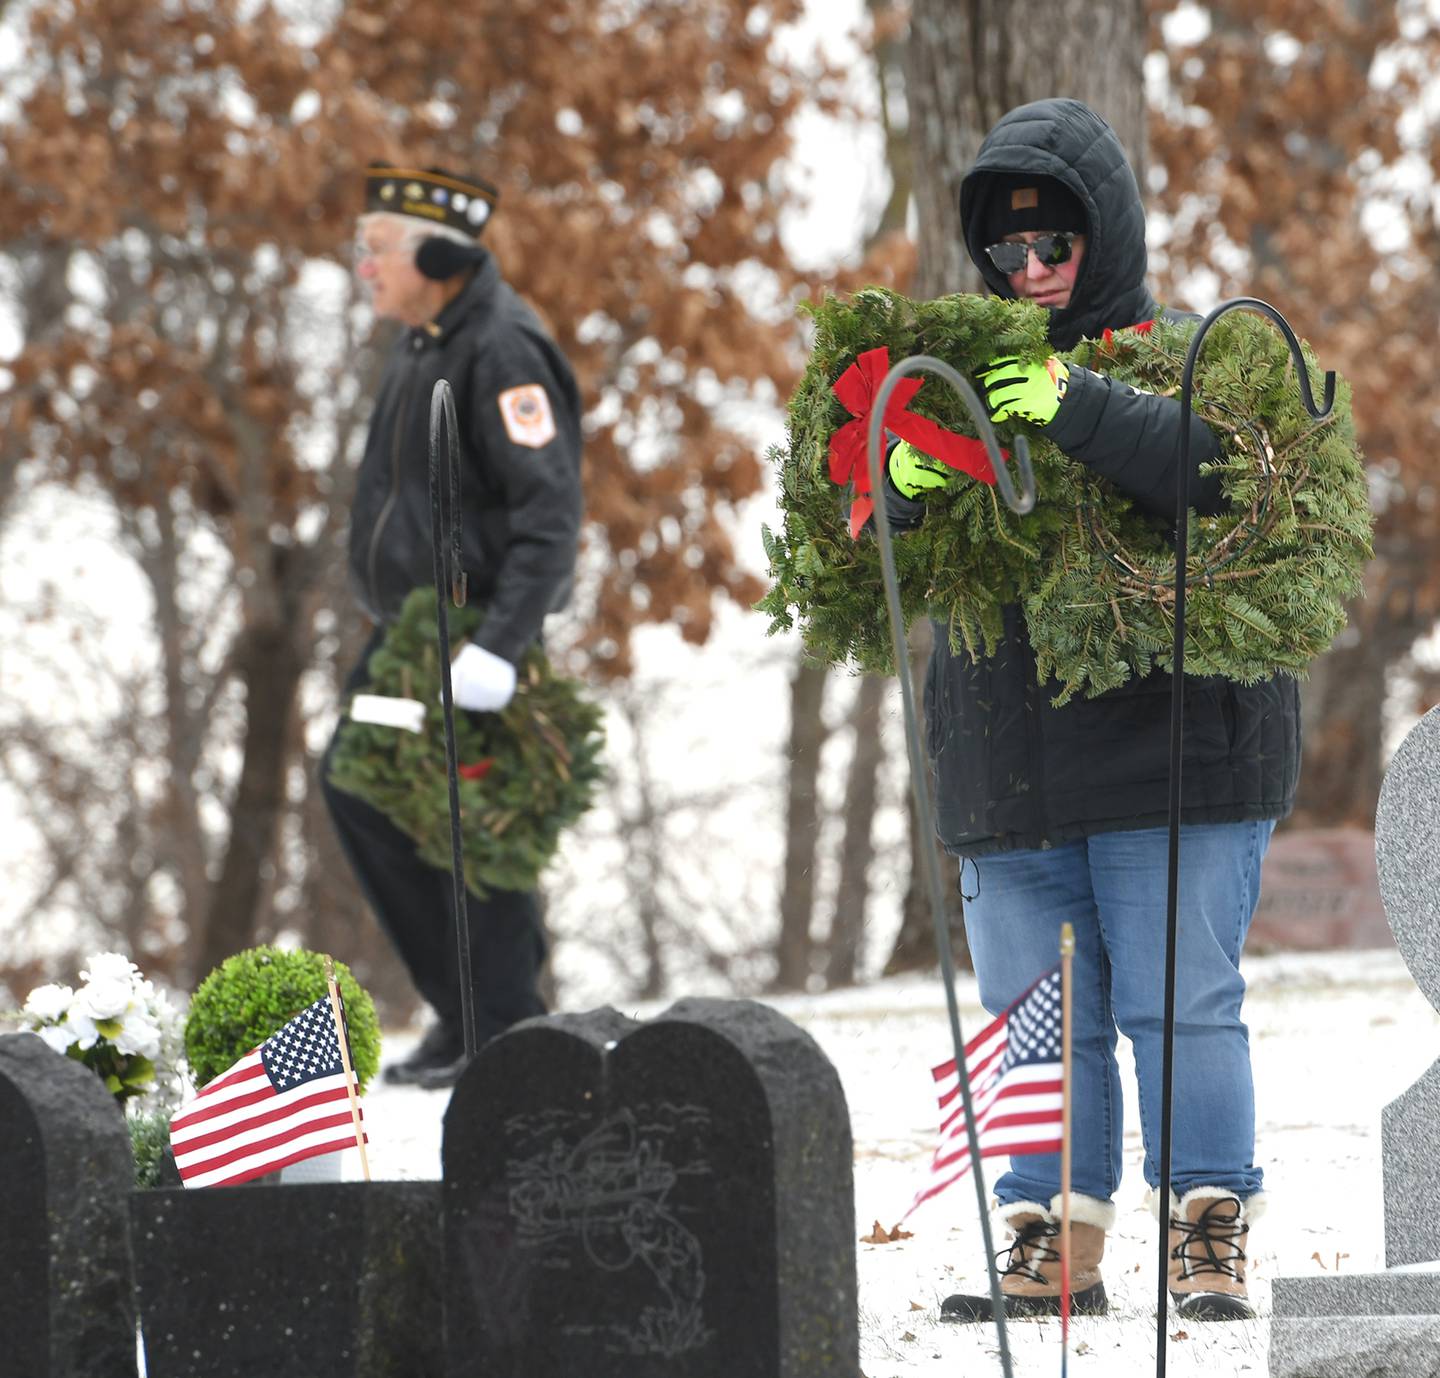 Anne Stevens of Oregpn places a wreath on a veteran's grave in Daysville Cemetery, southeast of Oregon, on Dec. 17, during the Wreaths Across America project. Stan Eden, also of Oregon, is shown in the background carrying one of the wreaths to another grave.